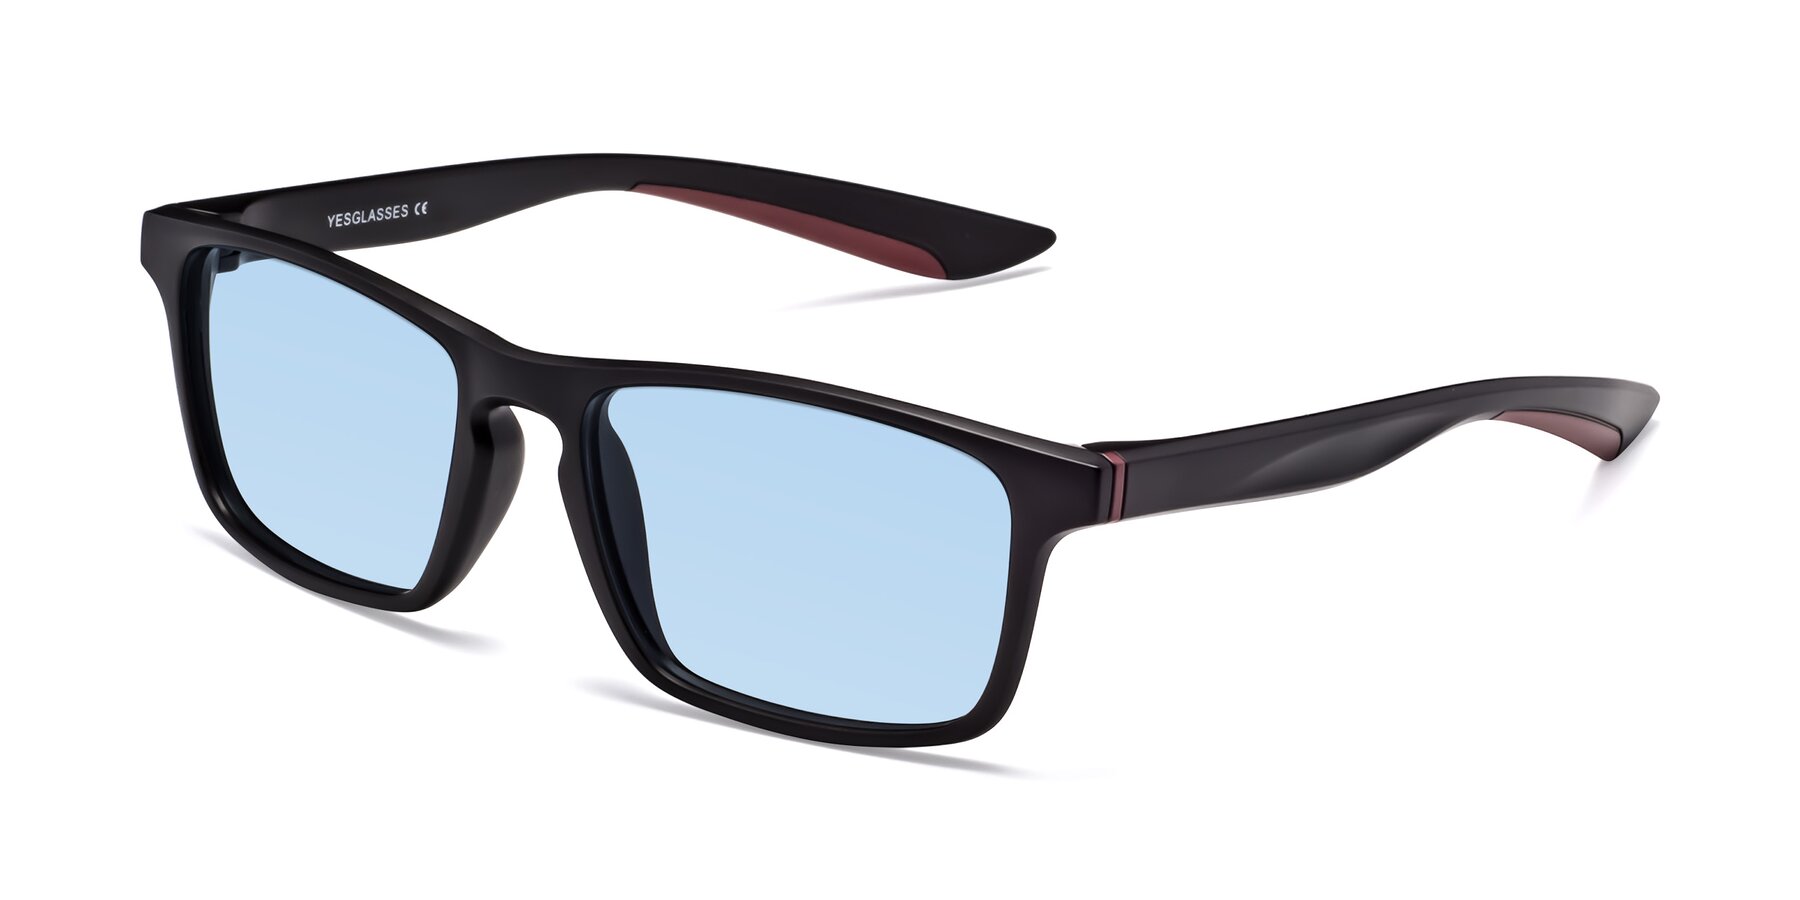 Angle of Passion in Matte Black-Wine with Light Blue Tinted Lenses